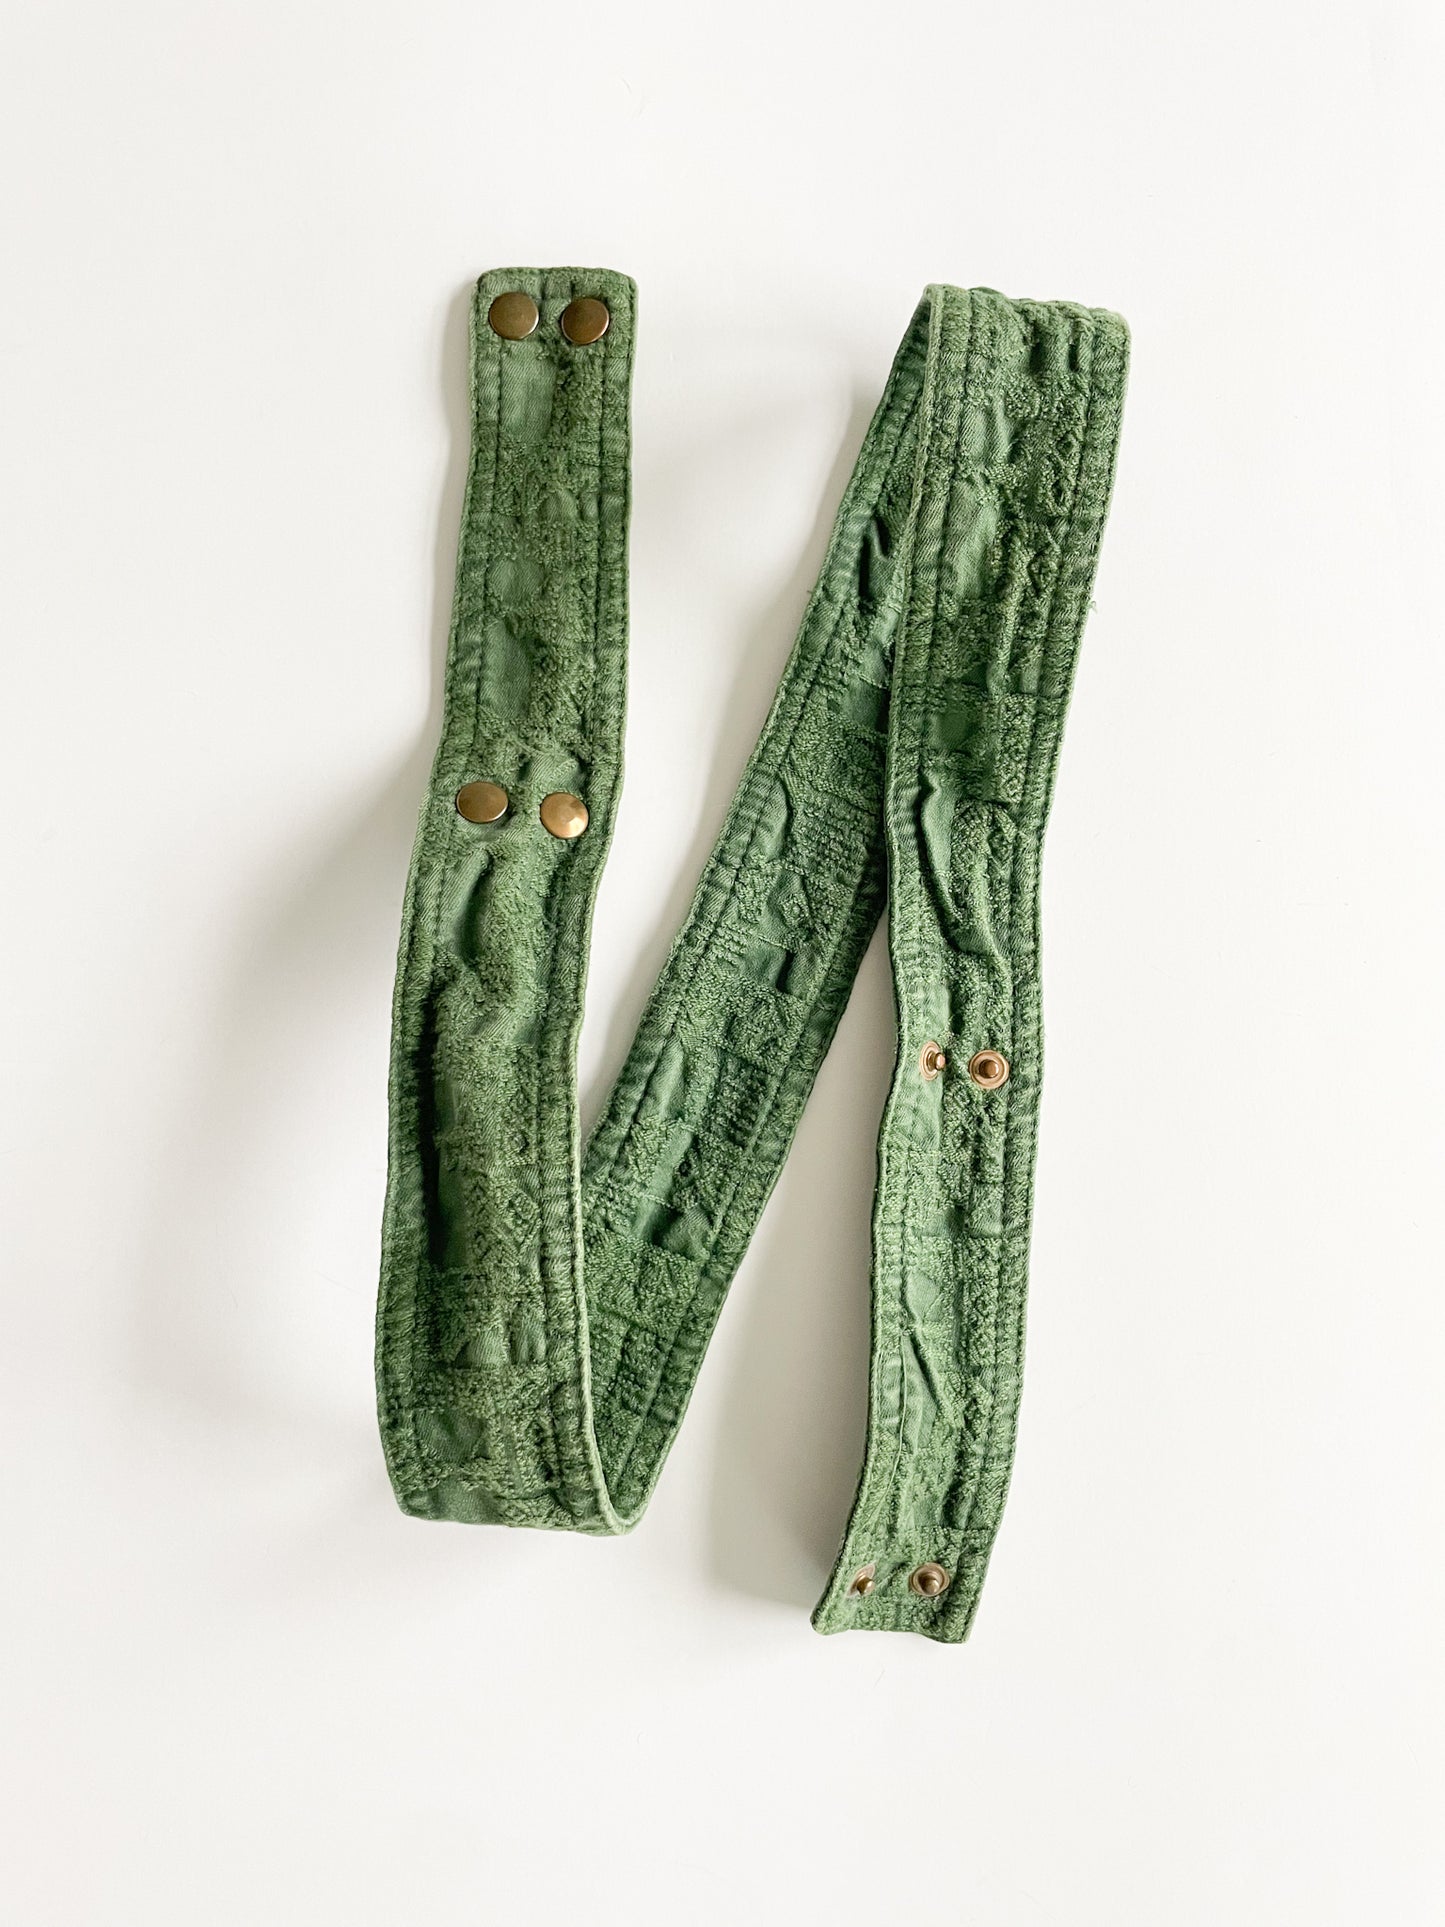 Green Embroidered Belt with Brass Snaps - Medium (33-38")